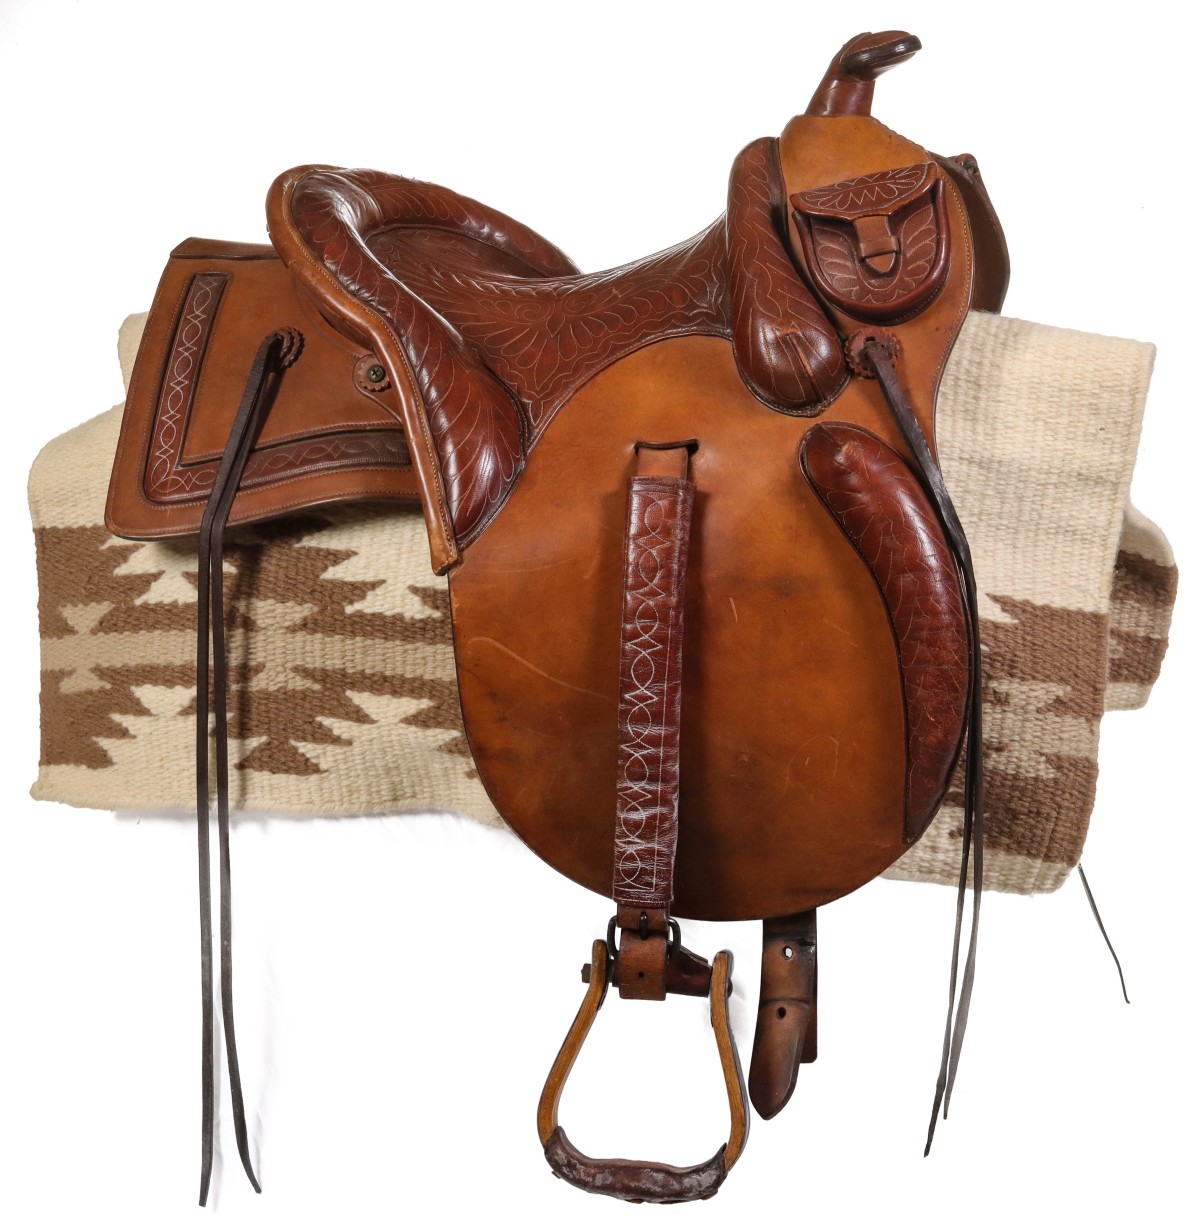 CHARLES SHIPLEY LADIES SADDLE WITH SPECIAL CAMBY TREE